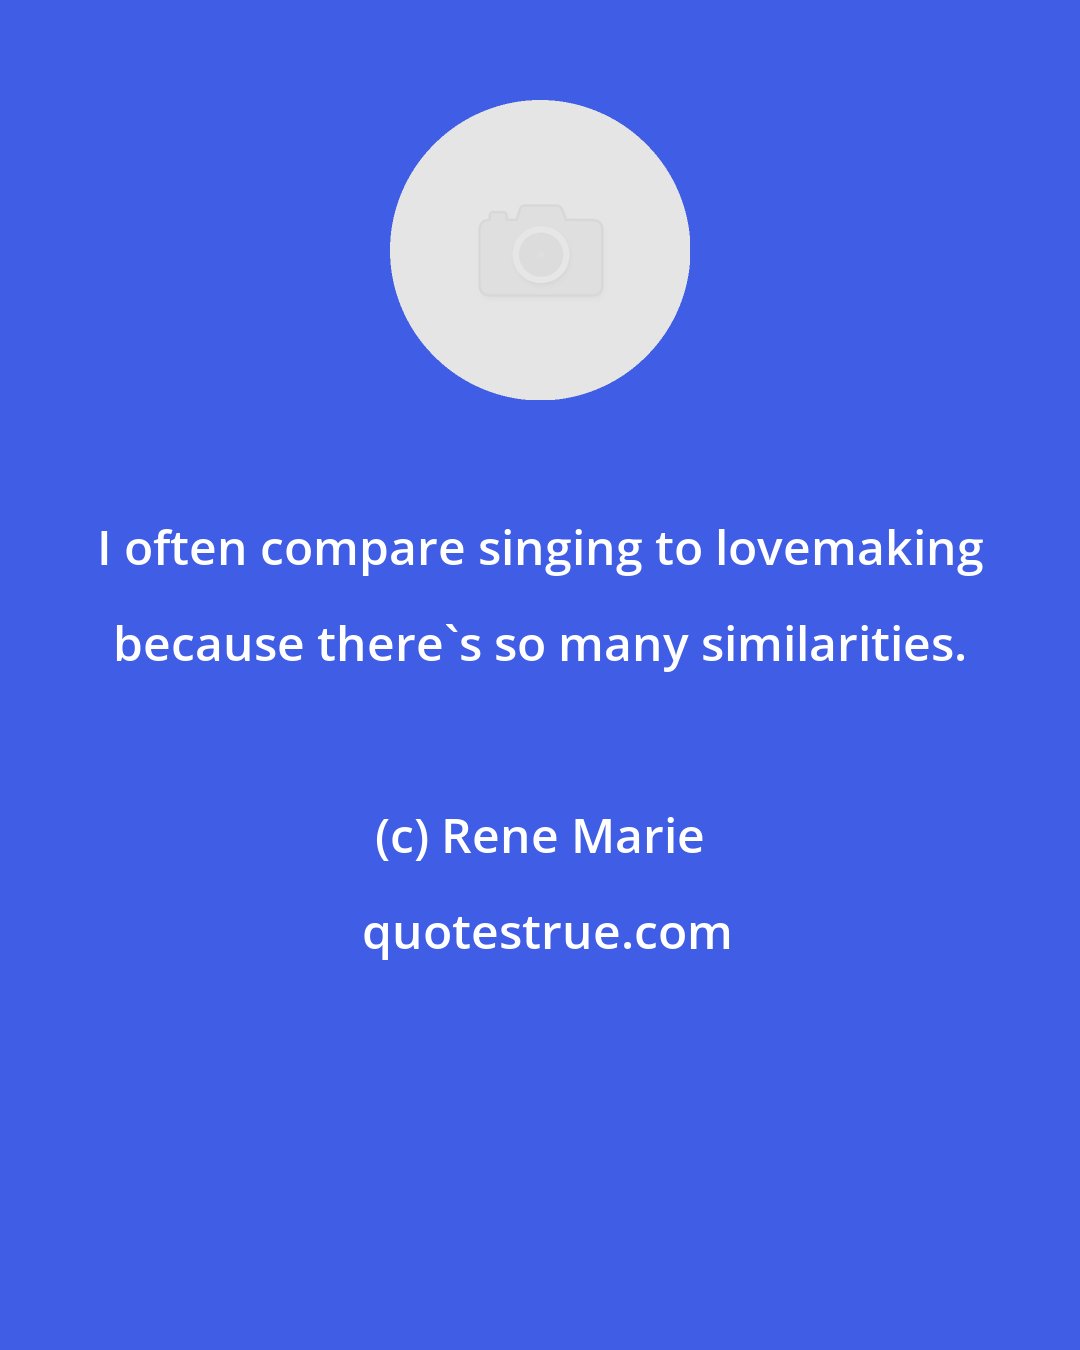 Rene Marie: I often compare singing to lovemaking because there's so many similarities.